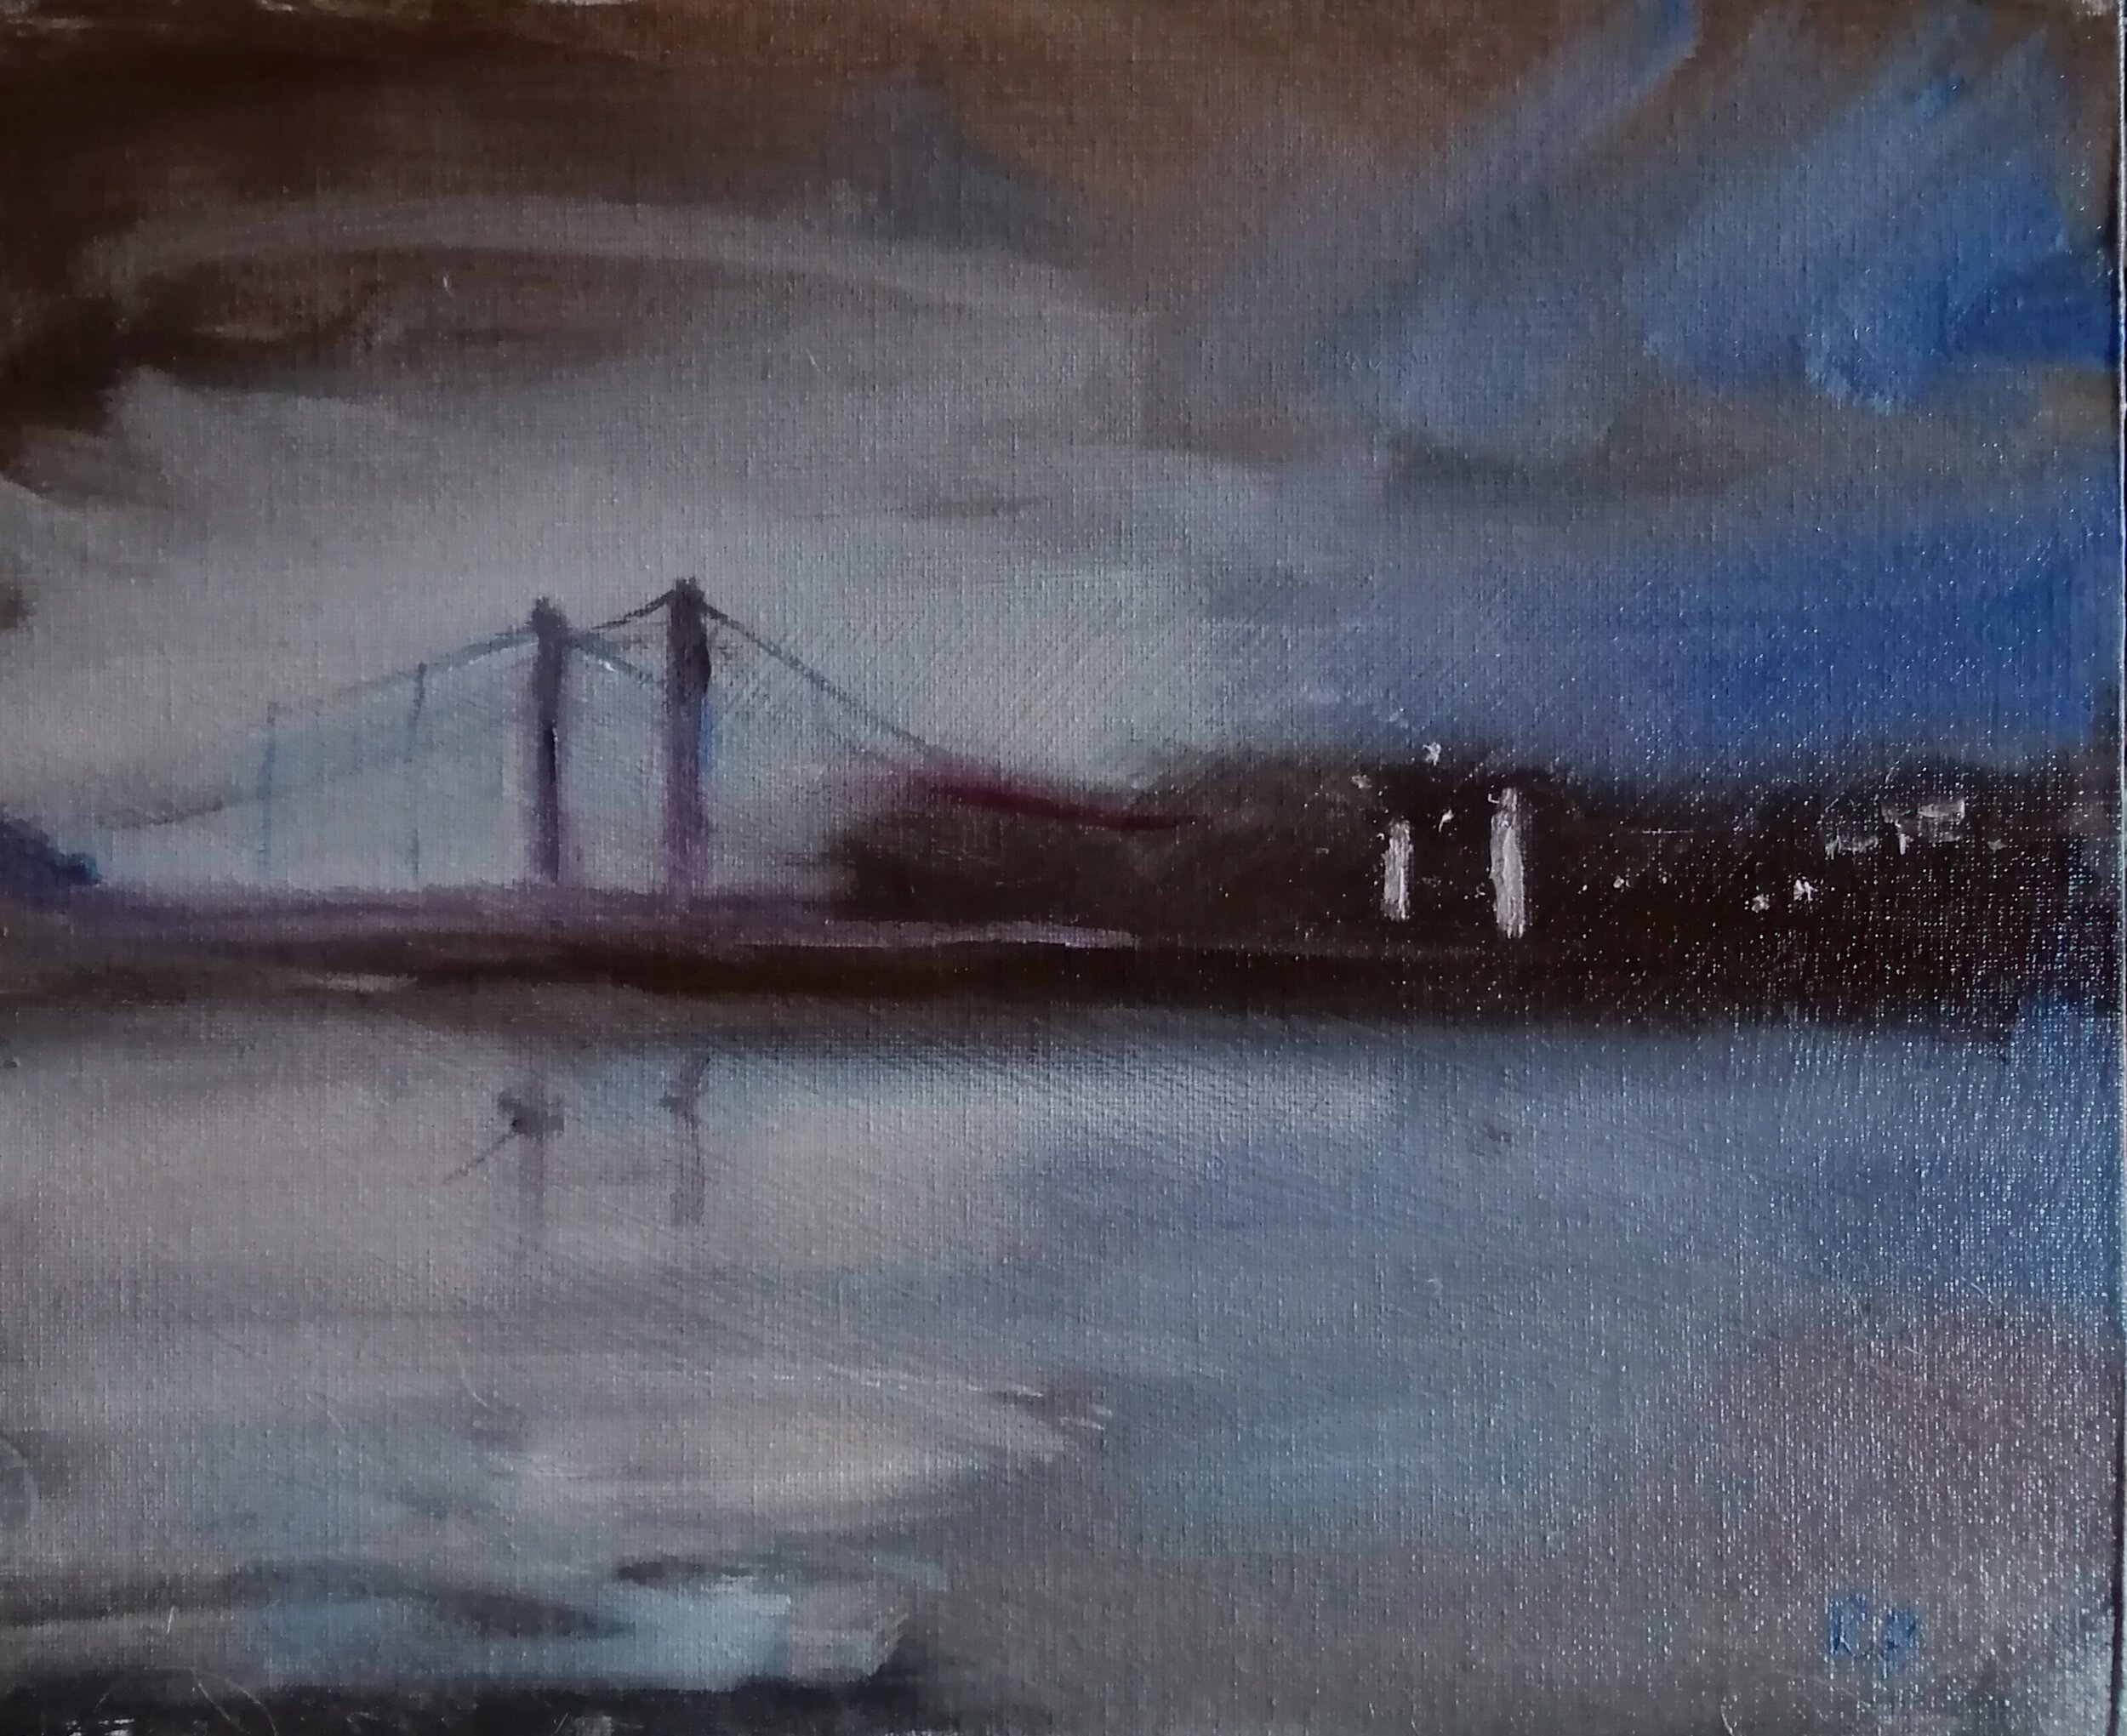  Chelsea Bridge  Oil on board  31x26 cms  £350  An impressionist oil sketch of Chelsea Bridge in London at sunset. Sultry blues and soft milky whites off set the structure of the bridge as it recedes into the impending darkness. Painted with layers o